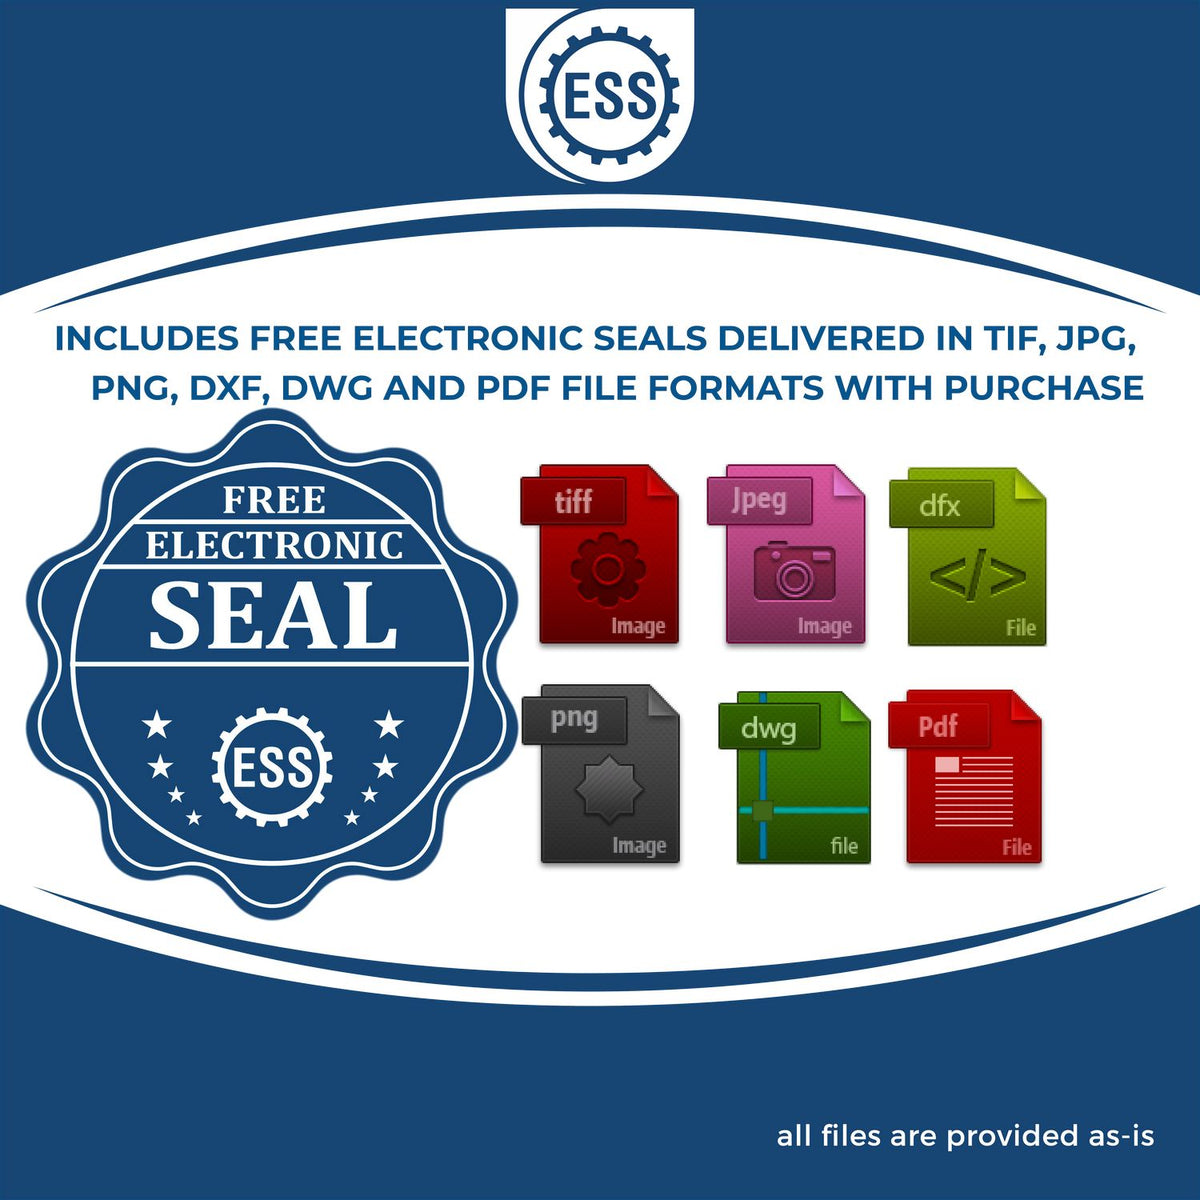 An infographic for the free electronic seal for the Heavy Duty Cast Iron Nebraska Architect Embosser illustrating the different file type icons such as DXF, DWG, TIF, JPG and PNG.